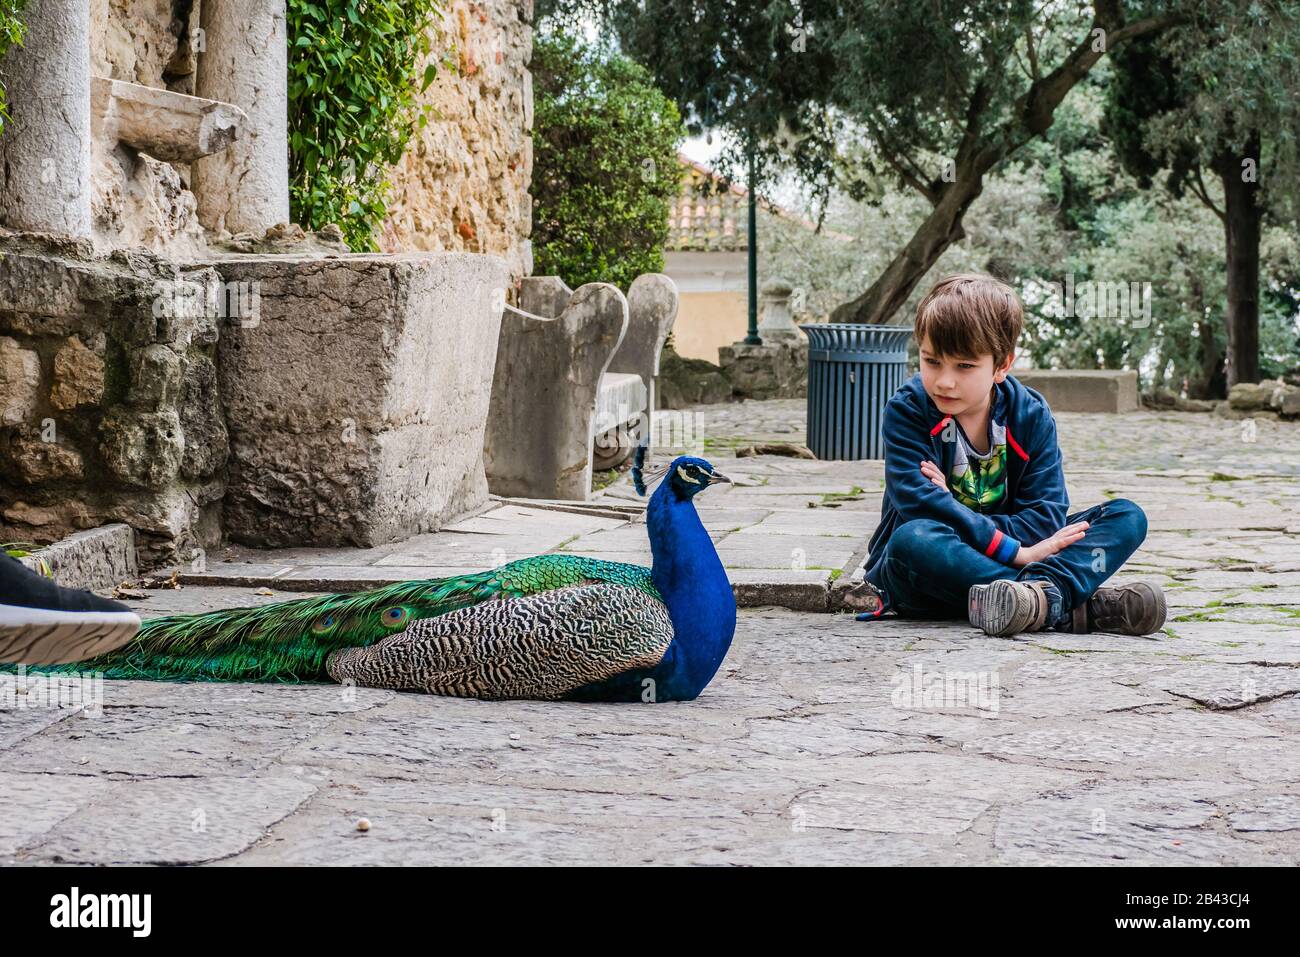 a young boy sitting next to a peacock laying on the ground Stock Photo